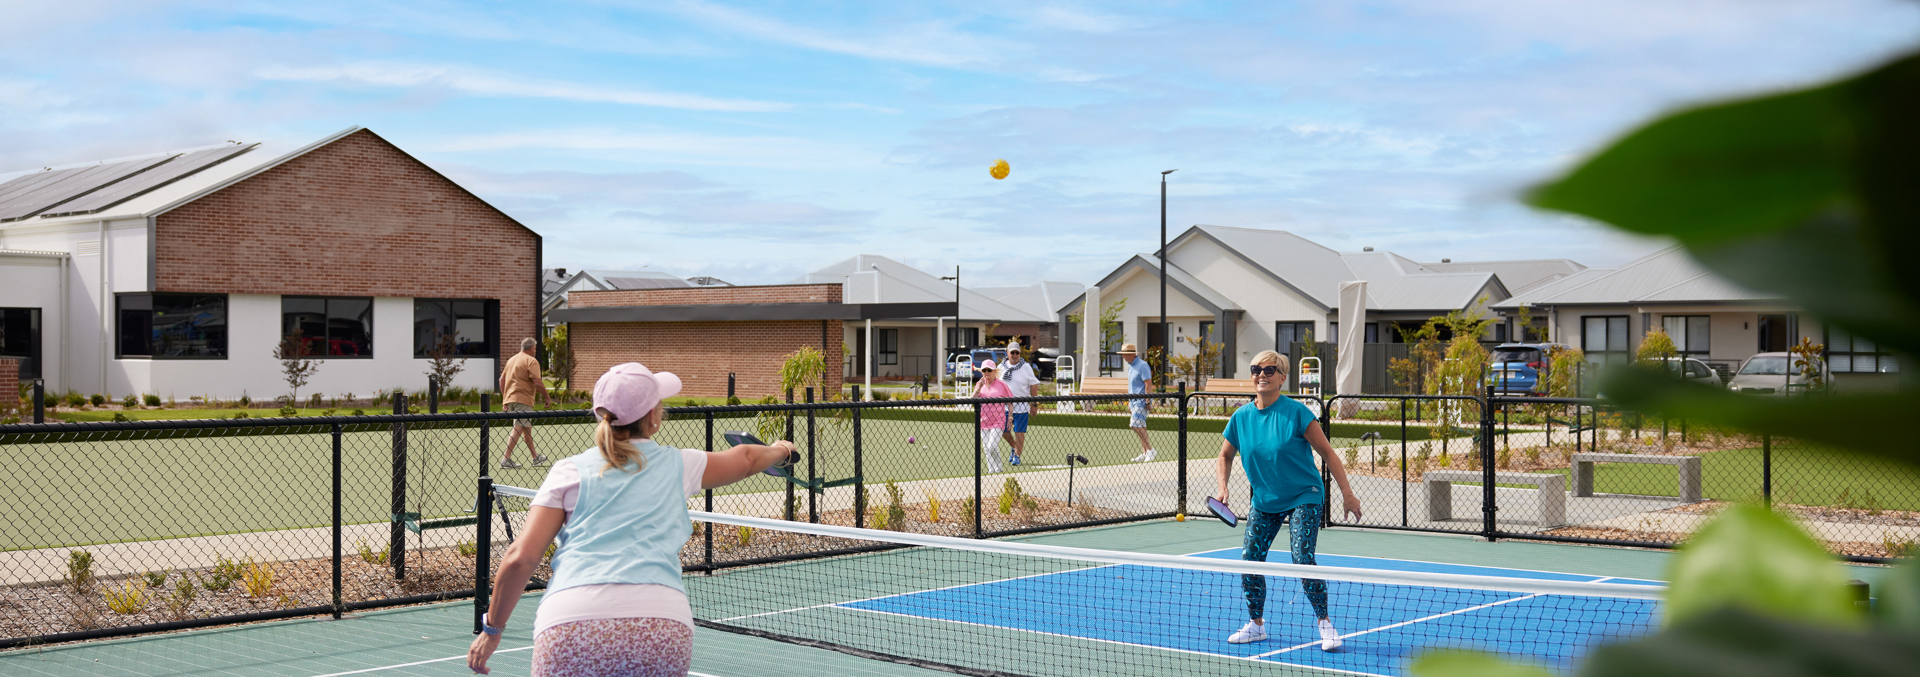 People playing pickleball at the Berwick clubhouse